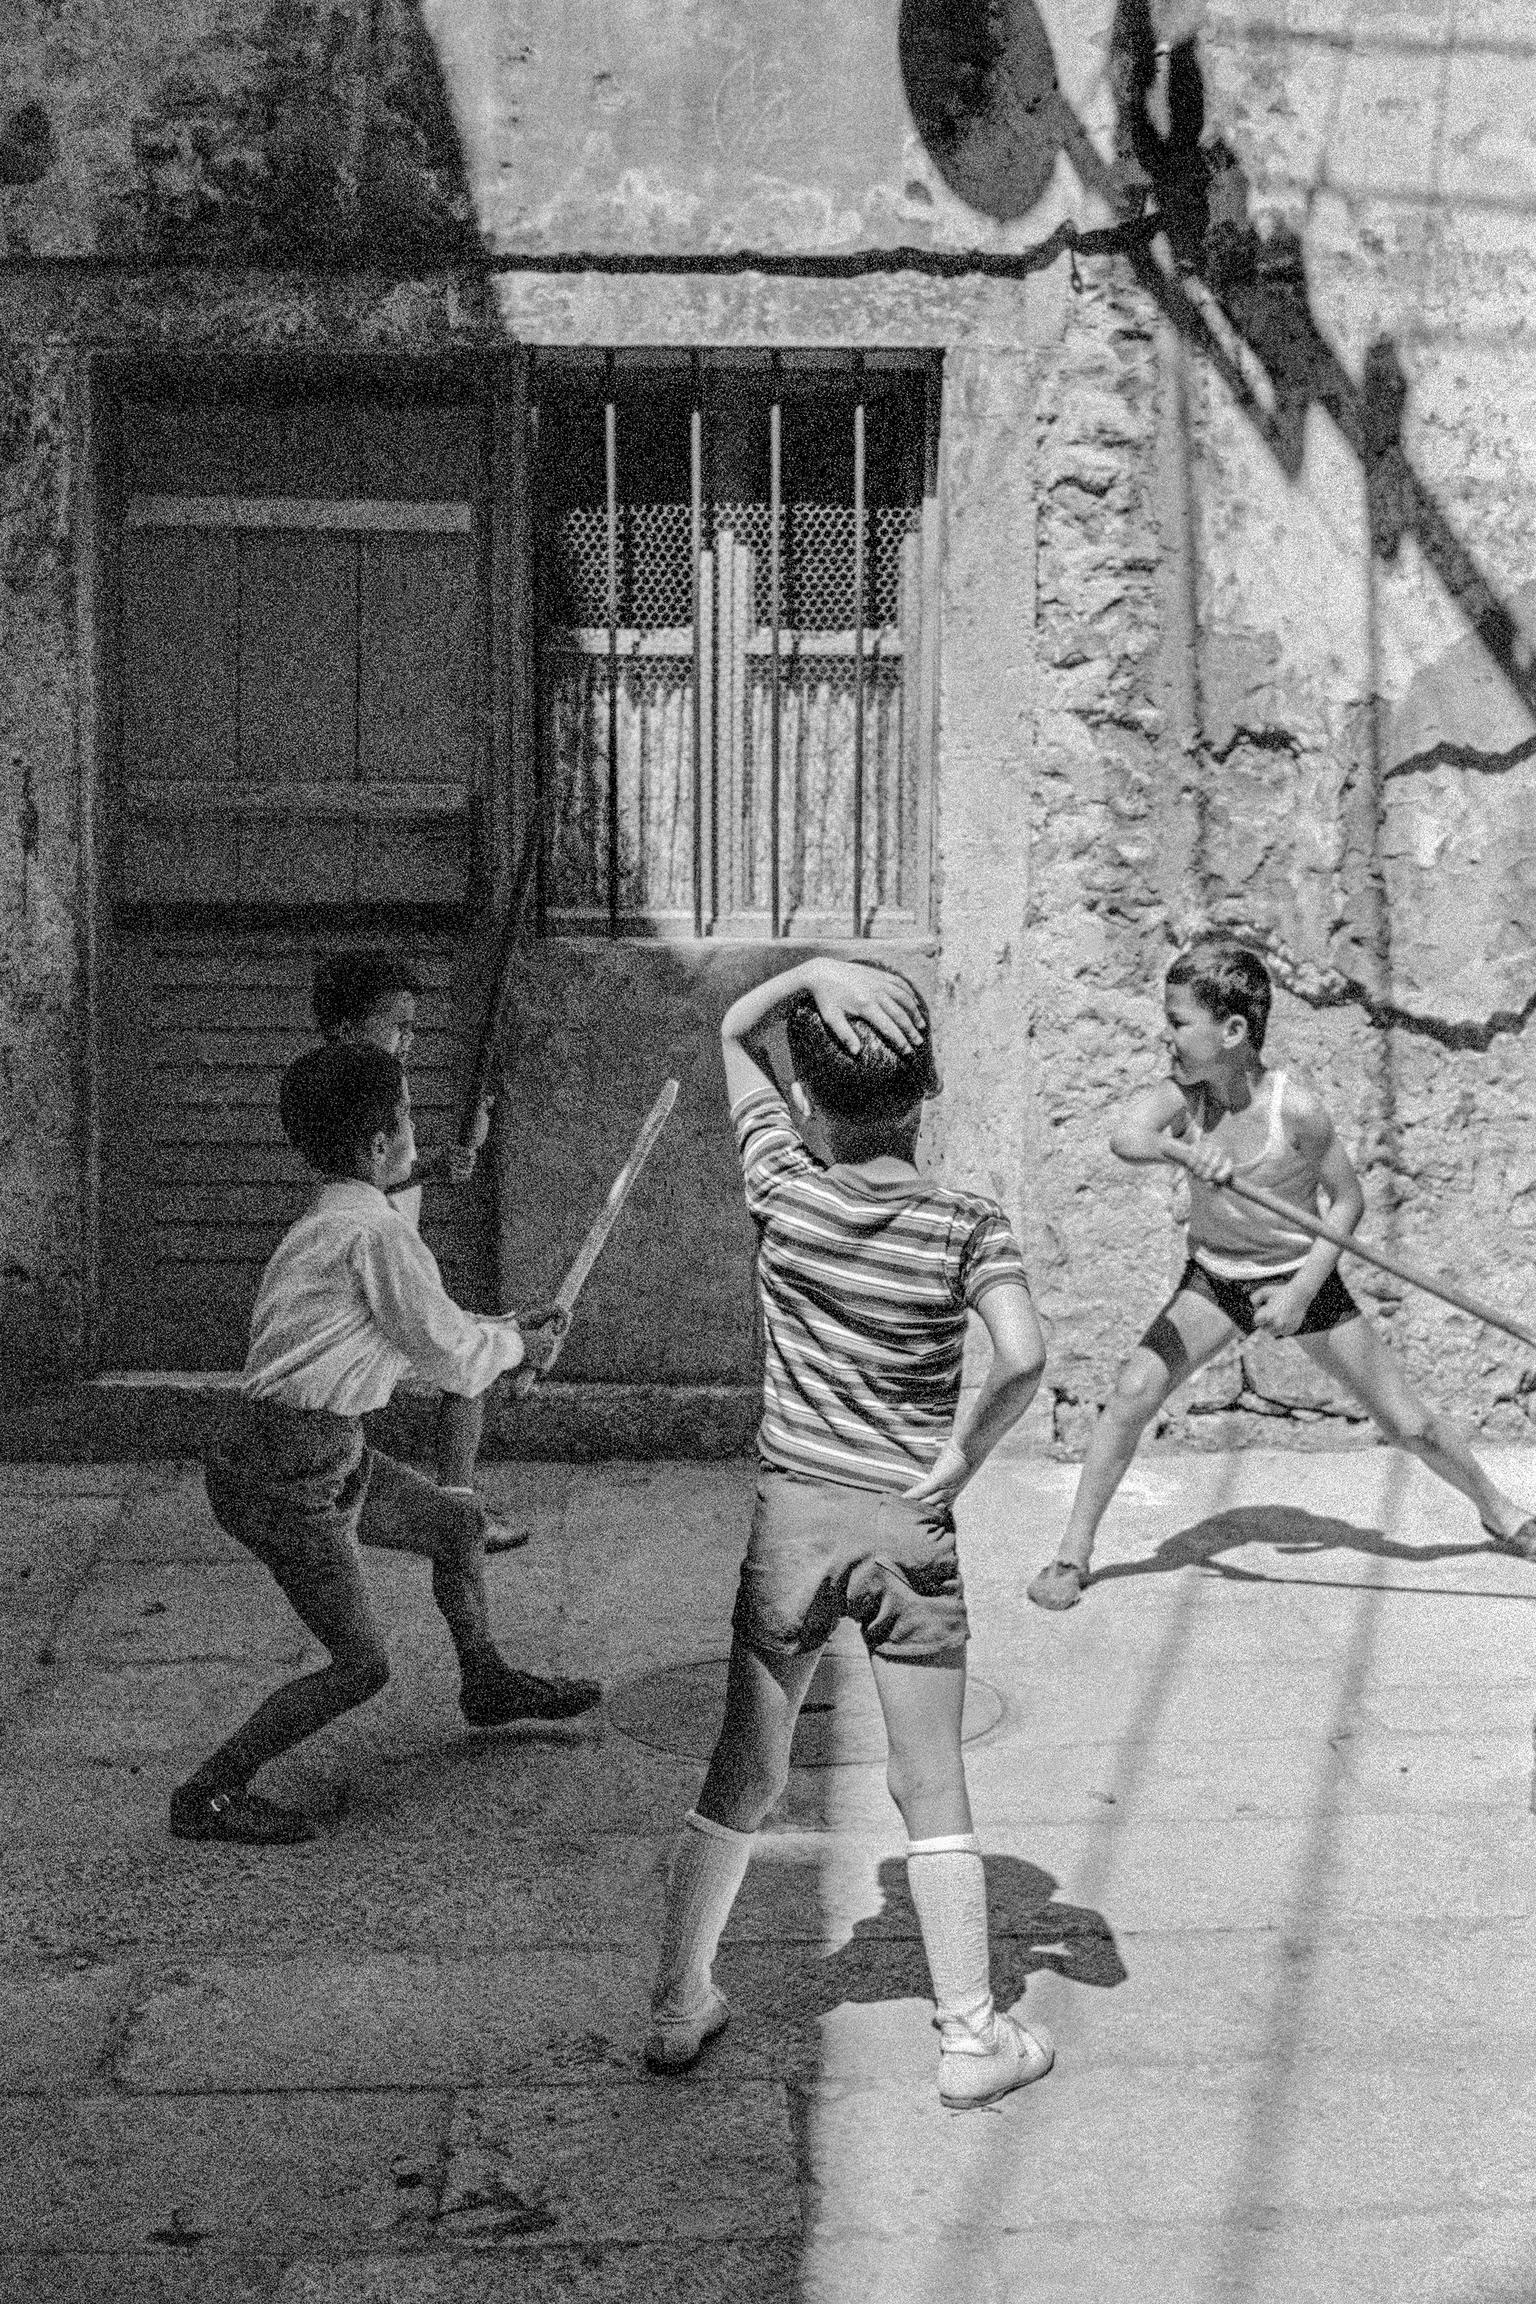 Children playing violent games in the streets. Dubrovnik. Croatia